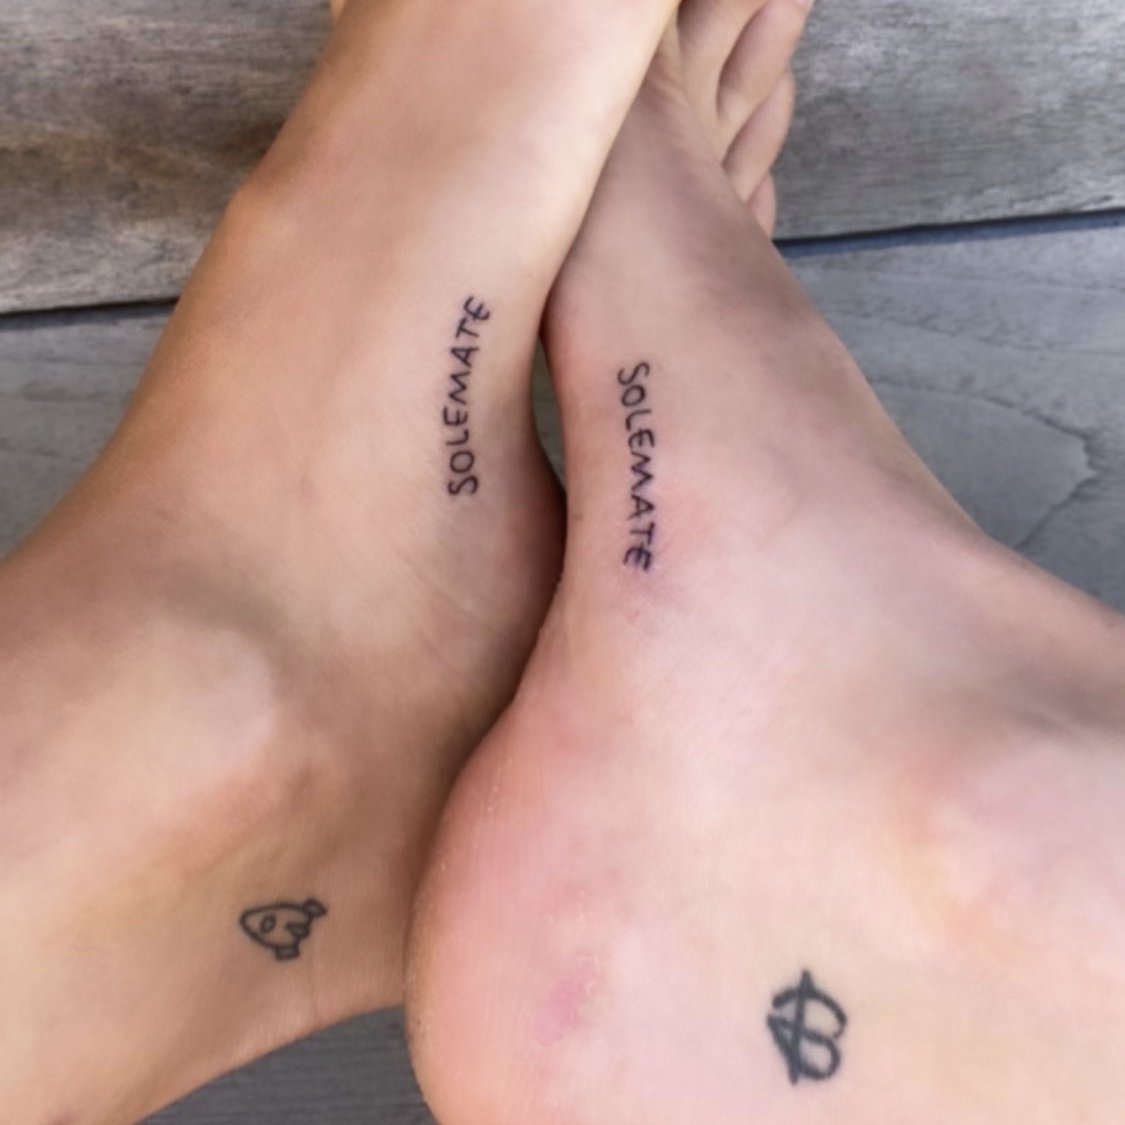 Cara Delevingne shares photos of her first tattoo